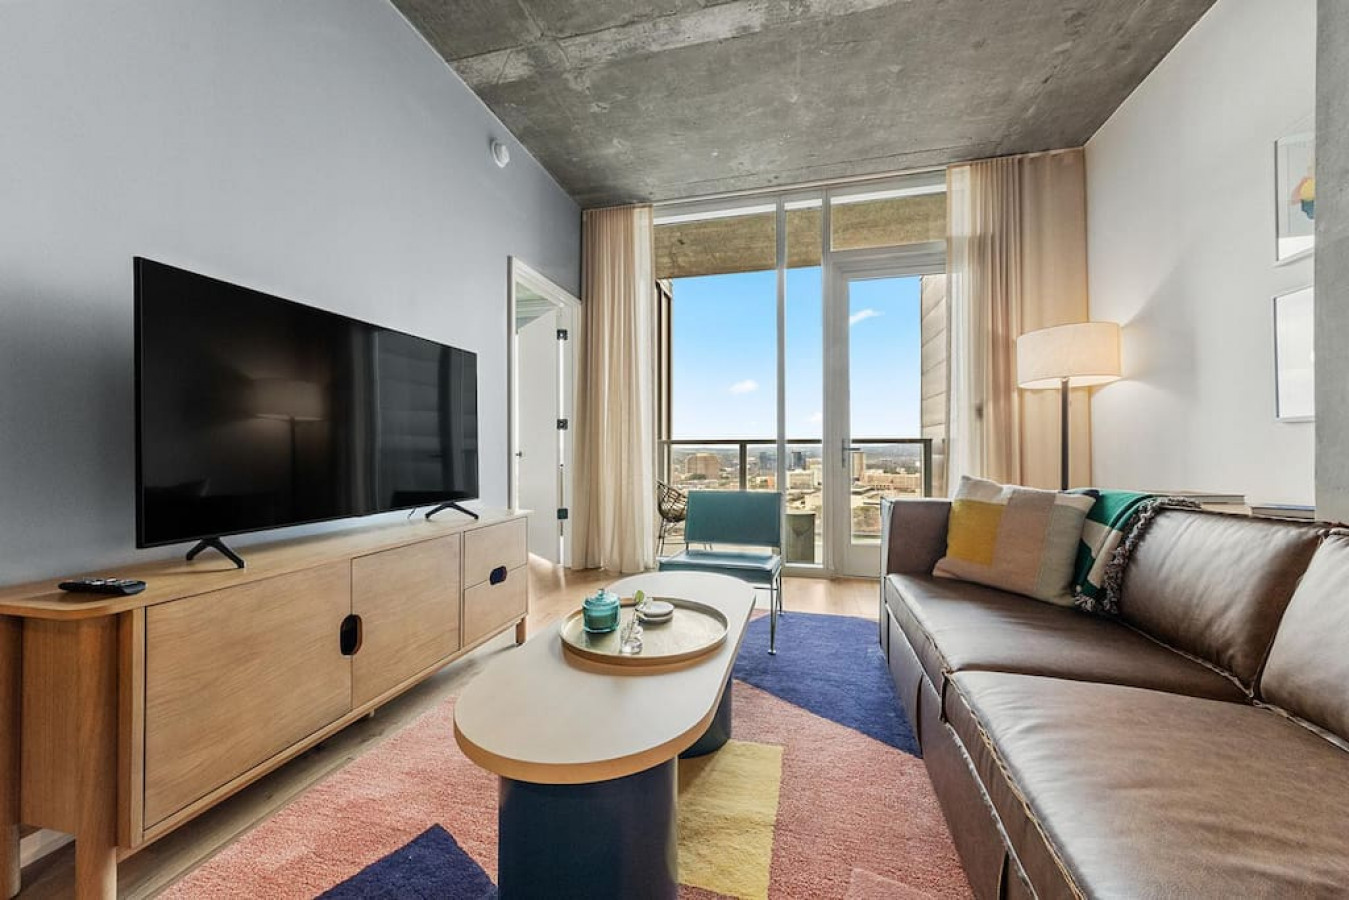 Property Image 1 - Waco at the Rainey District - Rainey Street - 26th Floor - Rooftop Pool